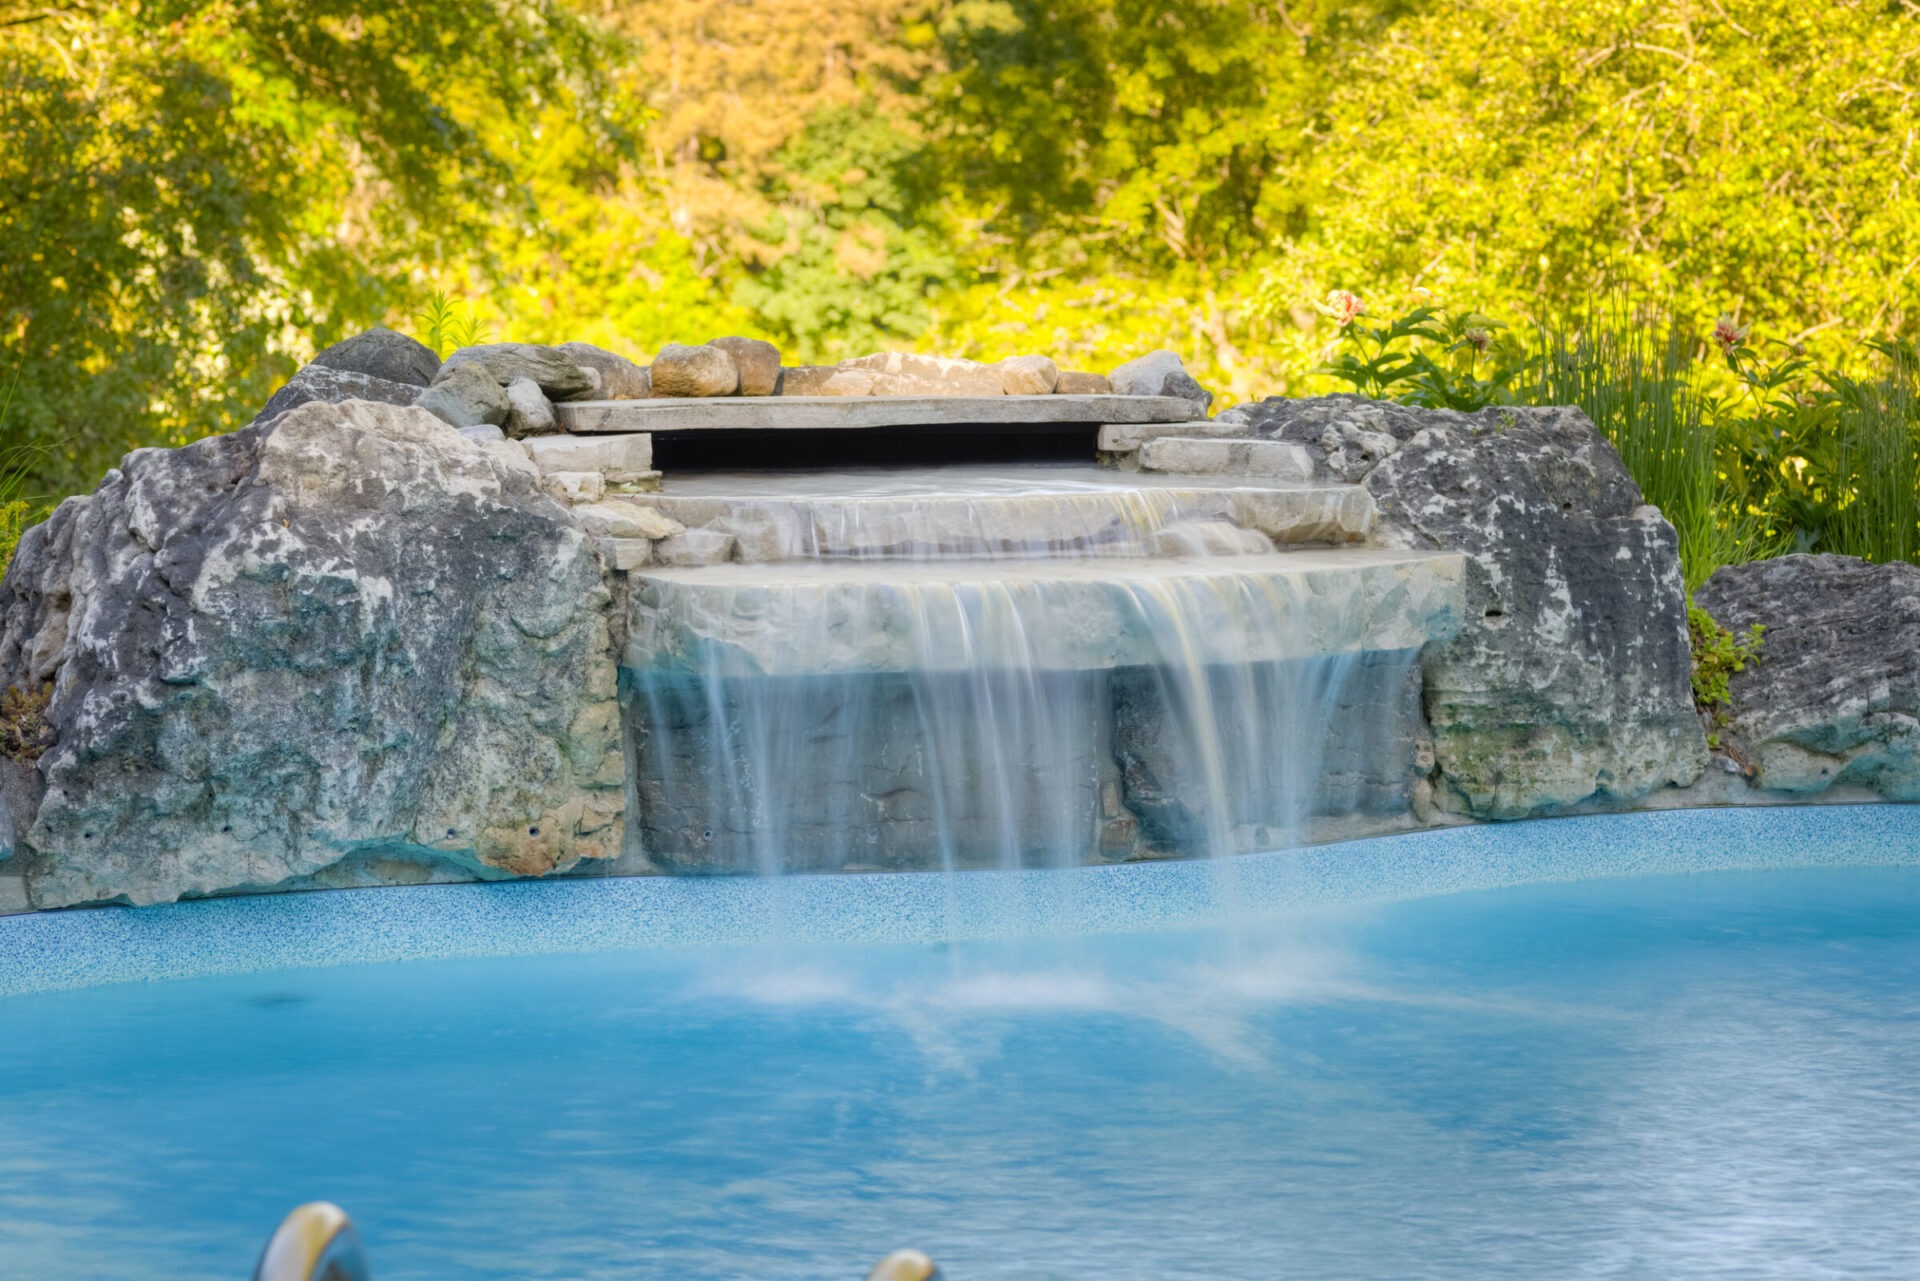 A manmade waterfall with clear cascading water over rocks into a tranquil blue pool, surrounded by lush green foliage in a serene setting.